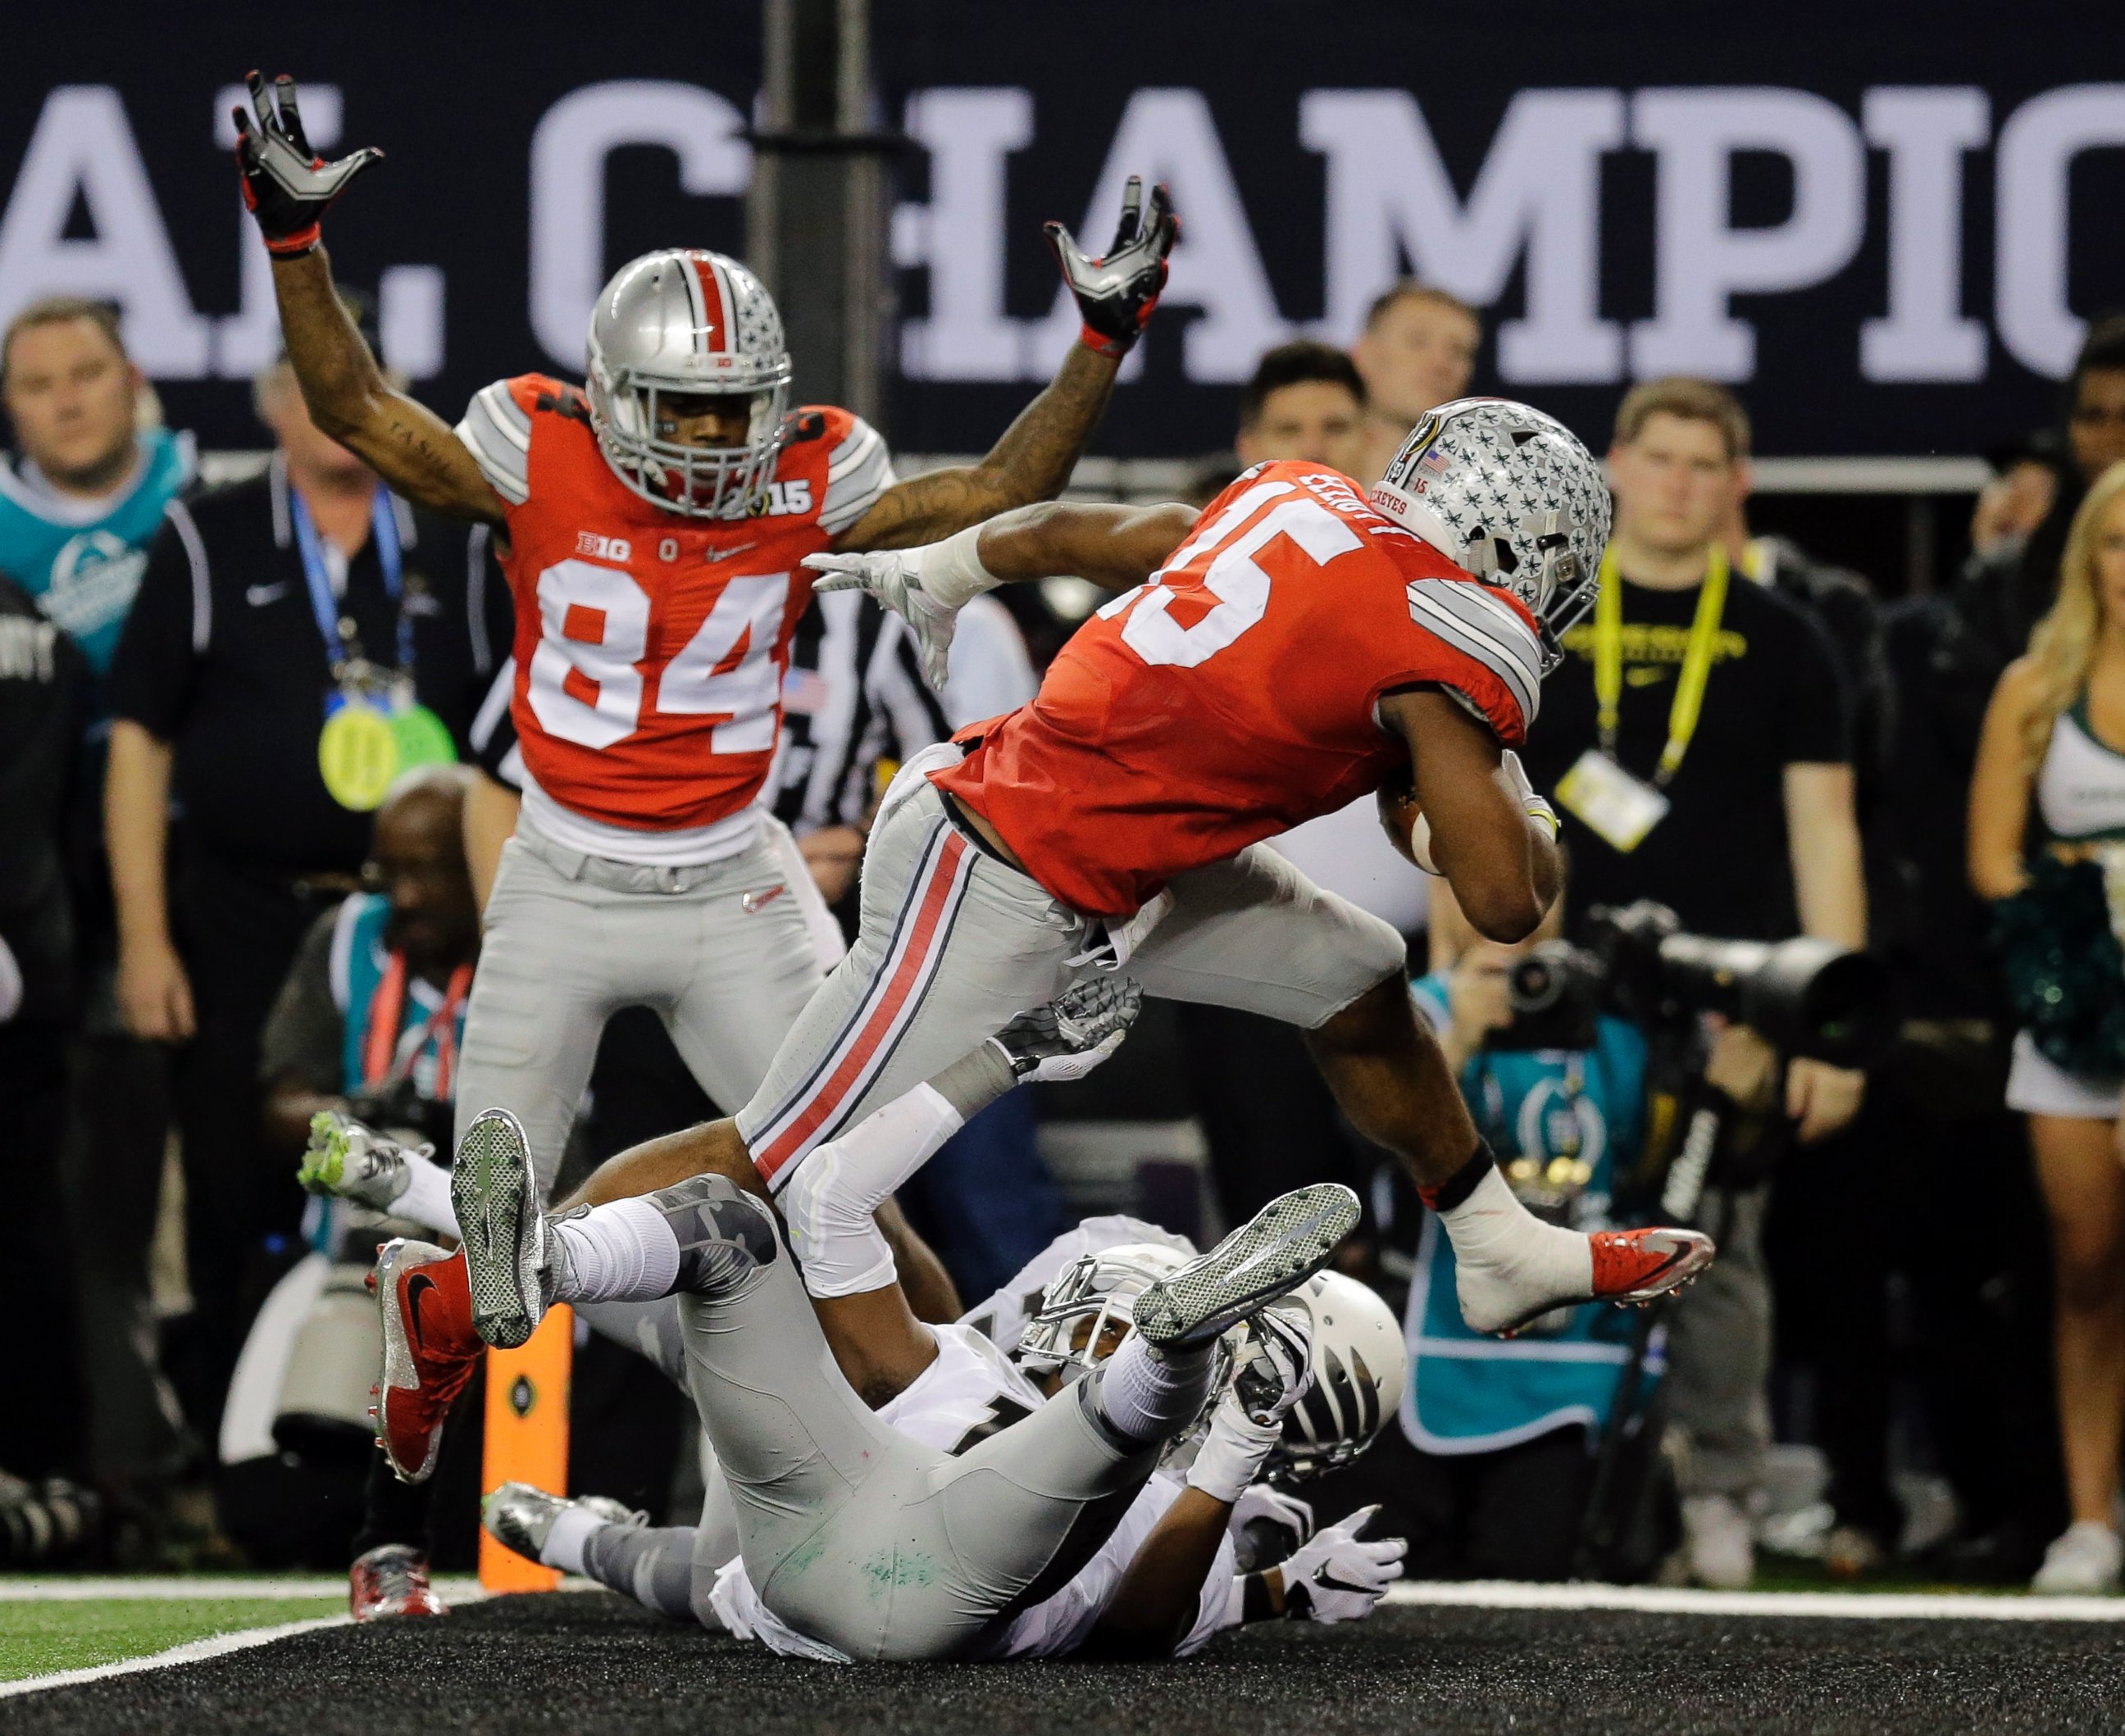 PHOTO: Ohio State's Ezekiel Elliott (15) runs for a nine-yard touchdown during the second half of the NCAA college football playoff championship game against Oregon, Jan. 12, 2015, in Arlington, Texas.